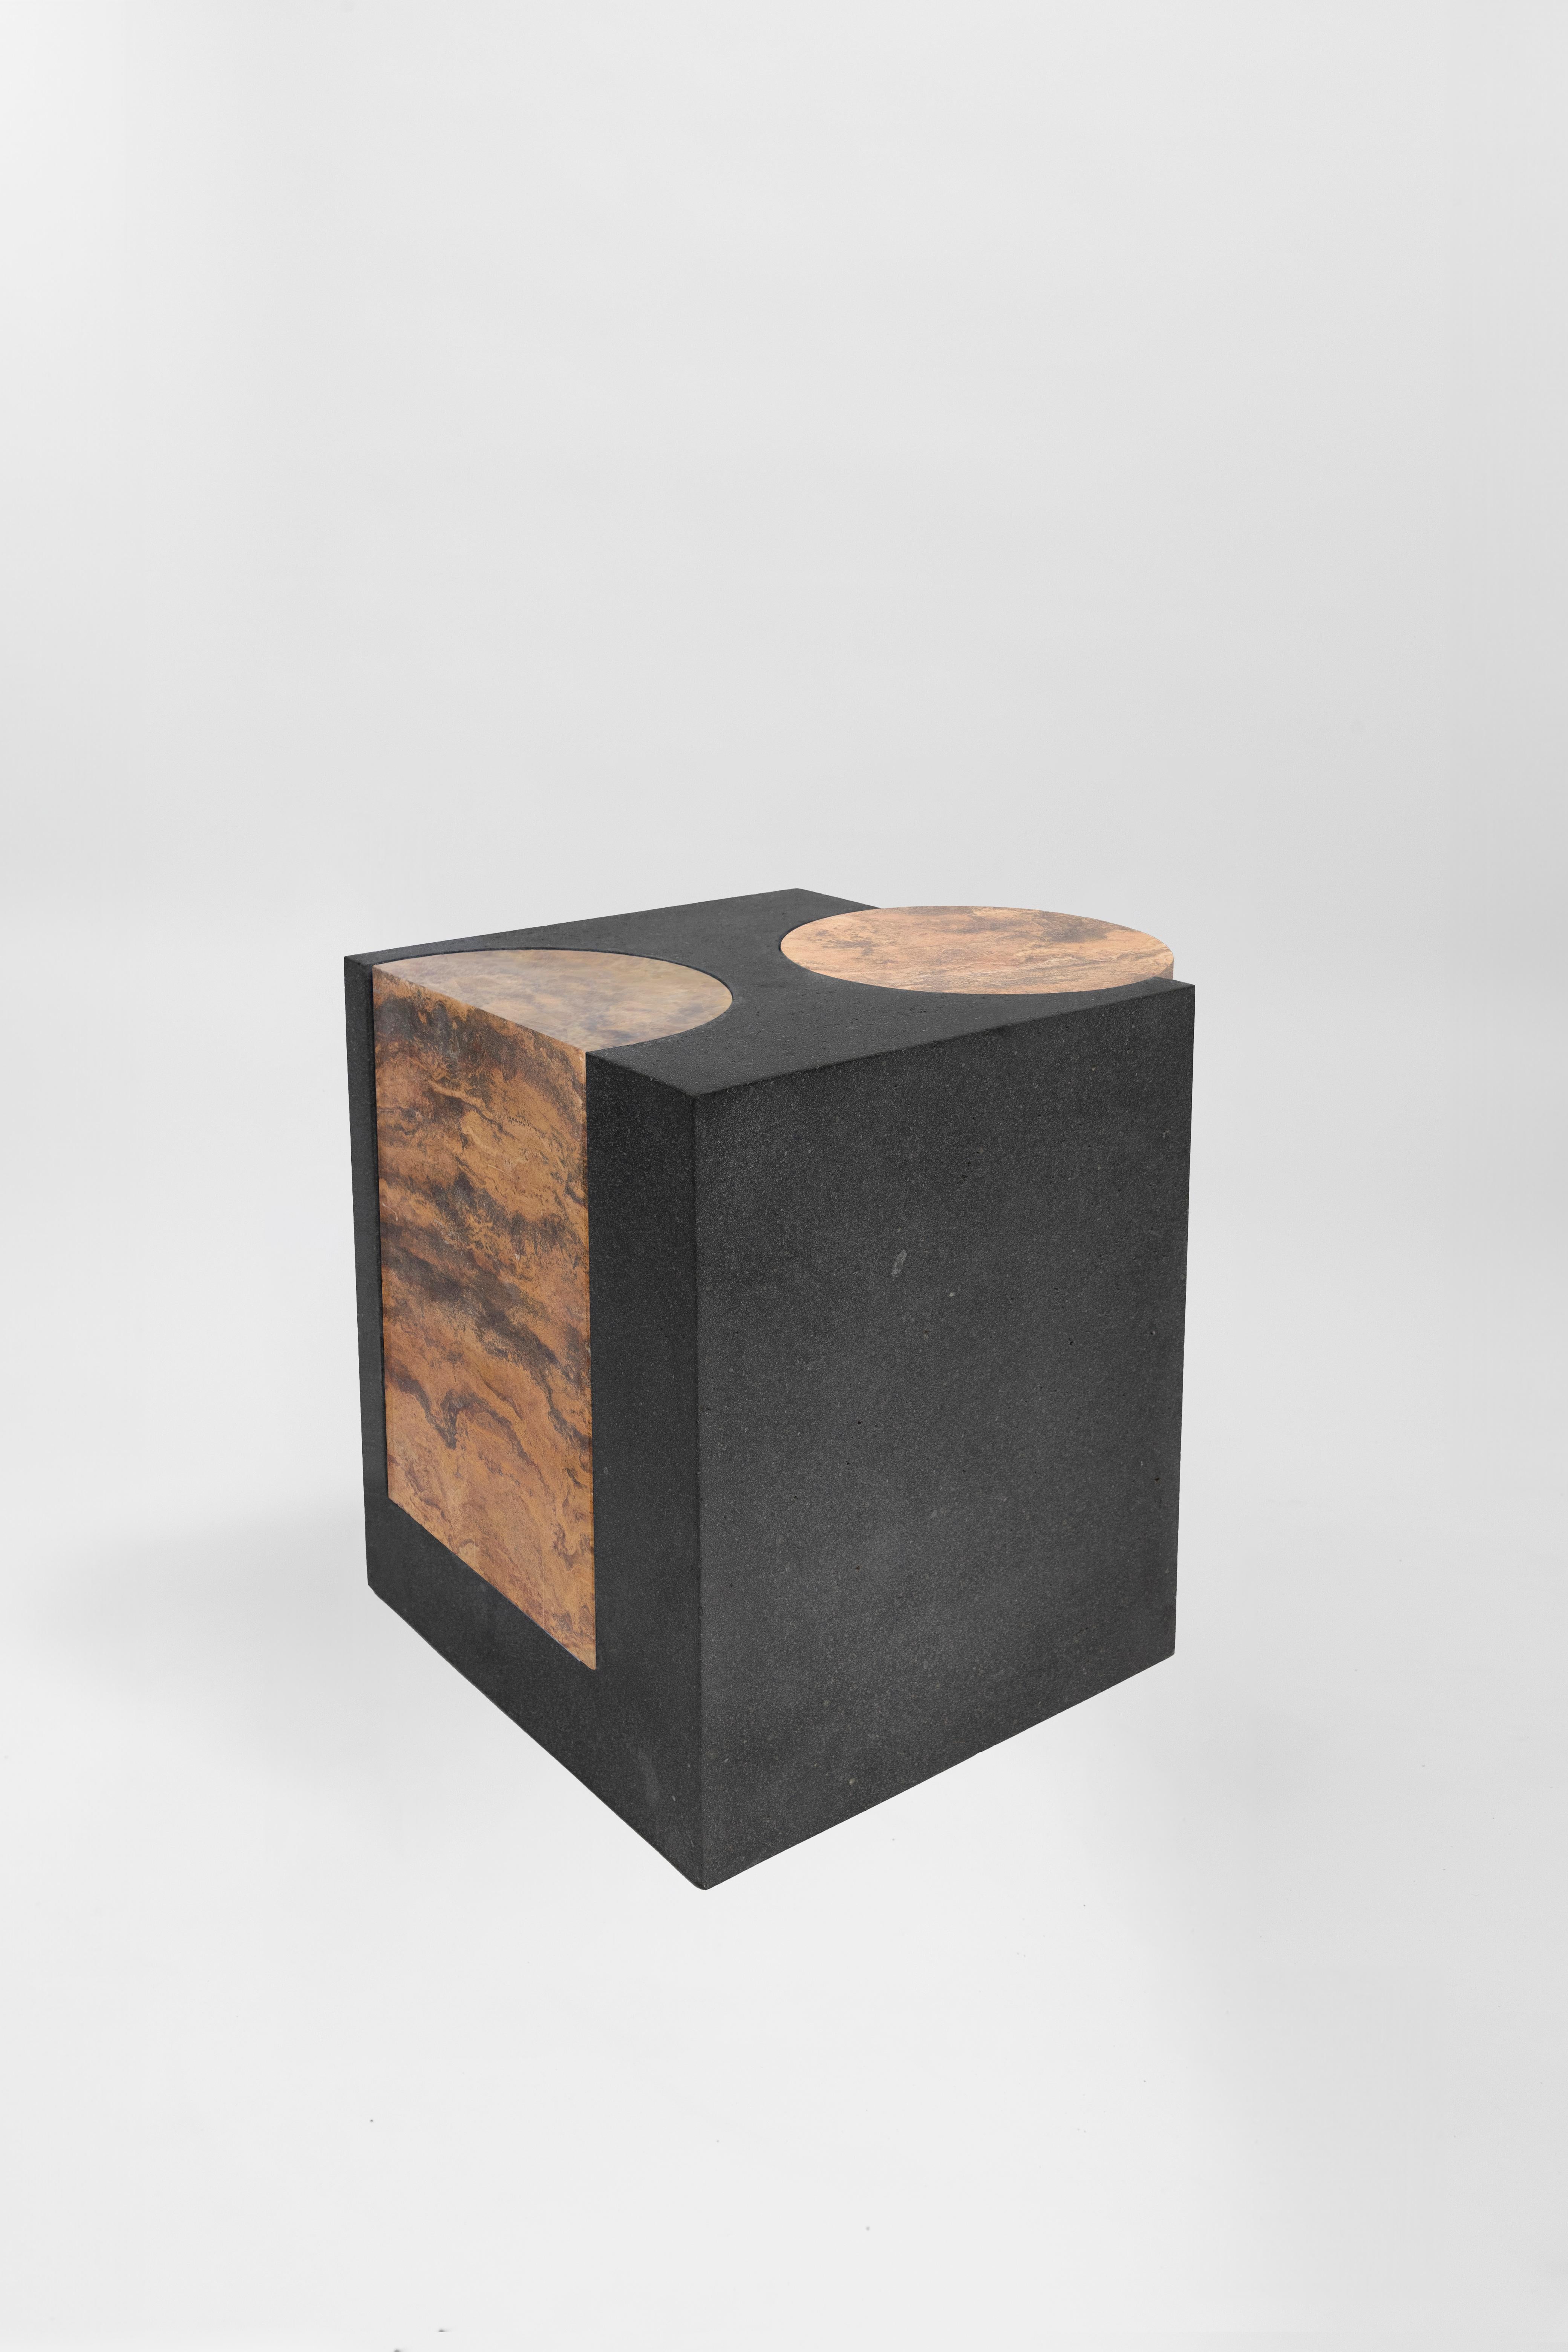 Materials: Lava stone and red travertine
Indoors and outdoors
Side table / Stool

**As this work is made of natural stone, color and veins may vary from the photo**

Through an abstract geometric language where cubes and cylinders playfully